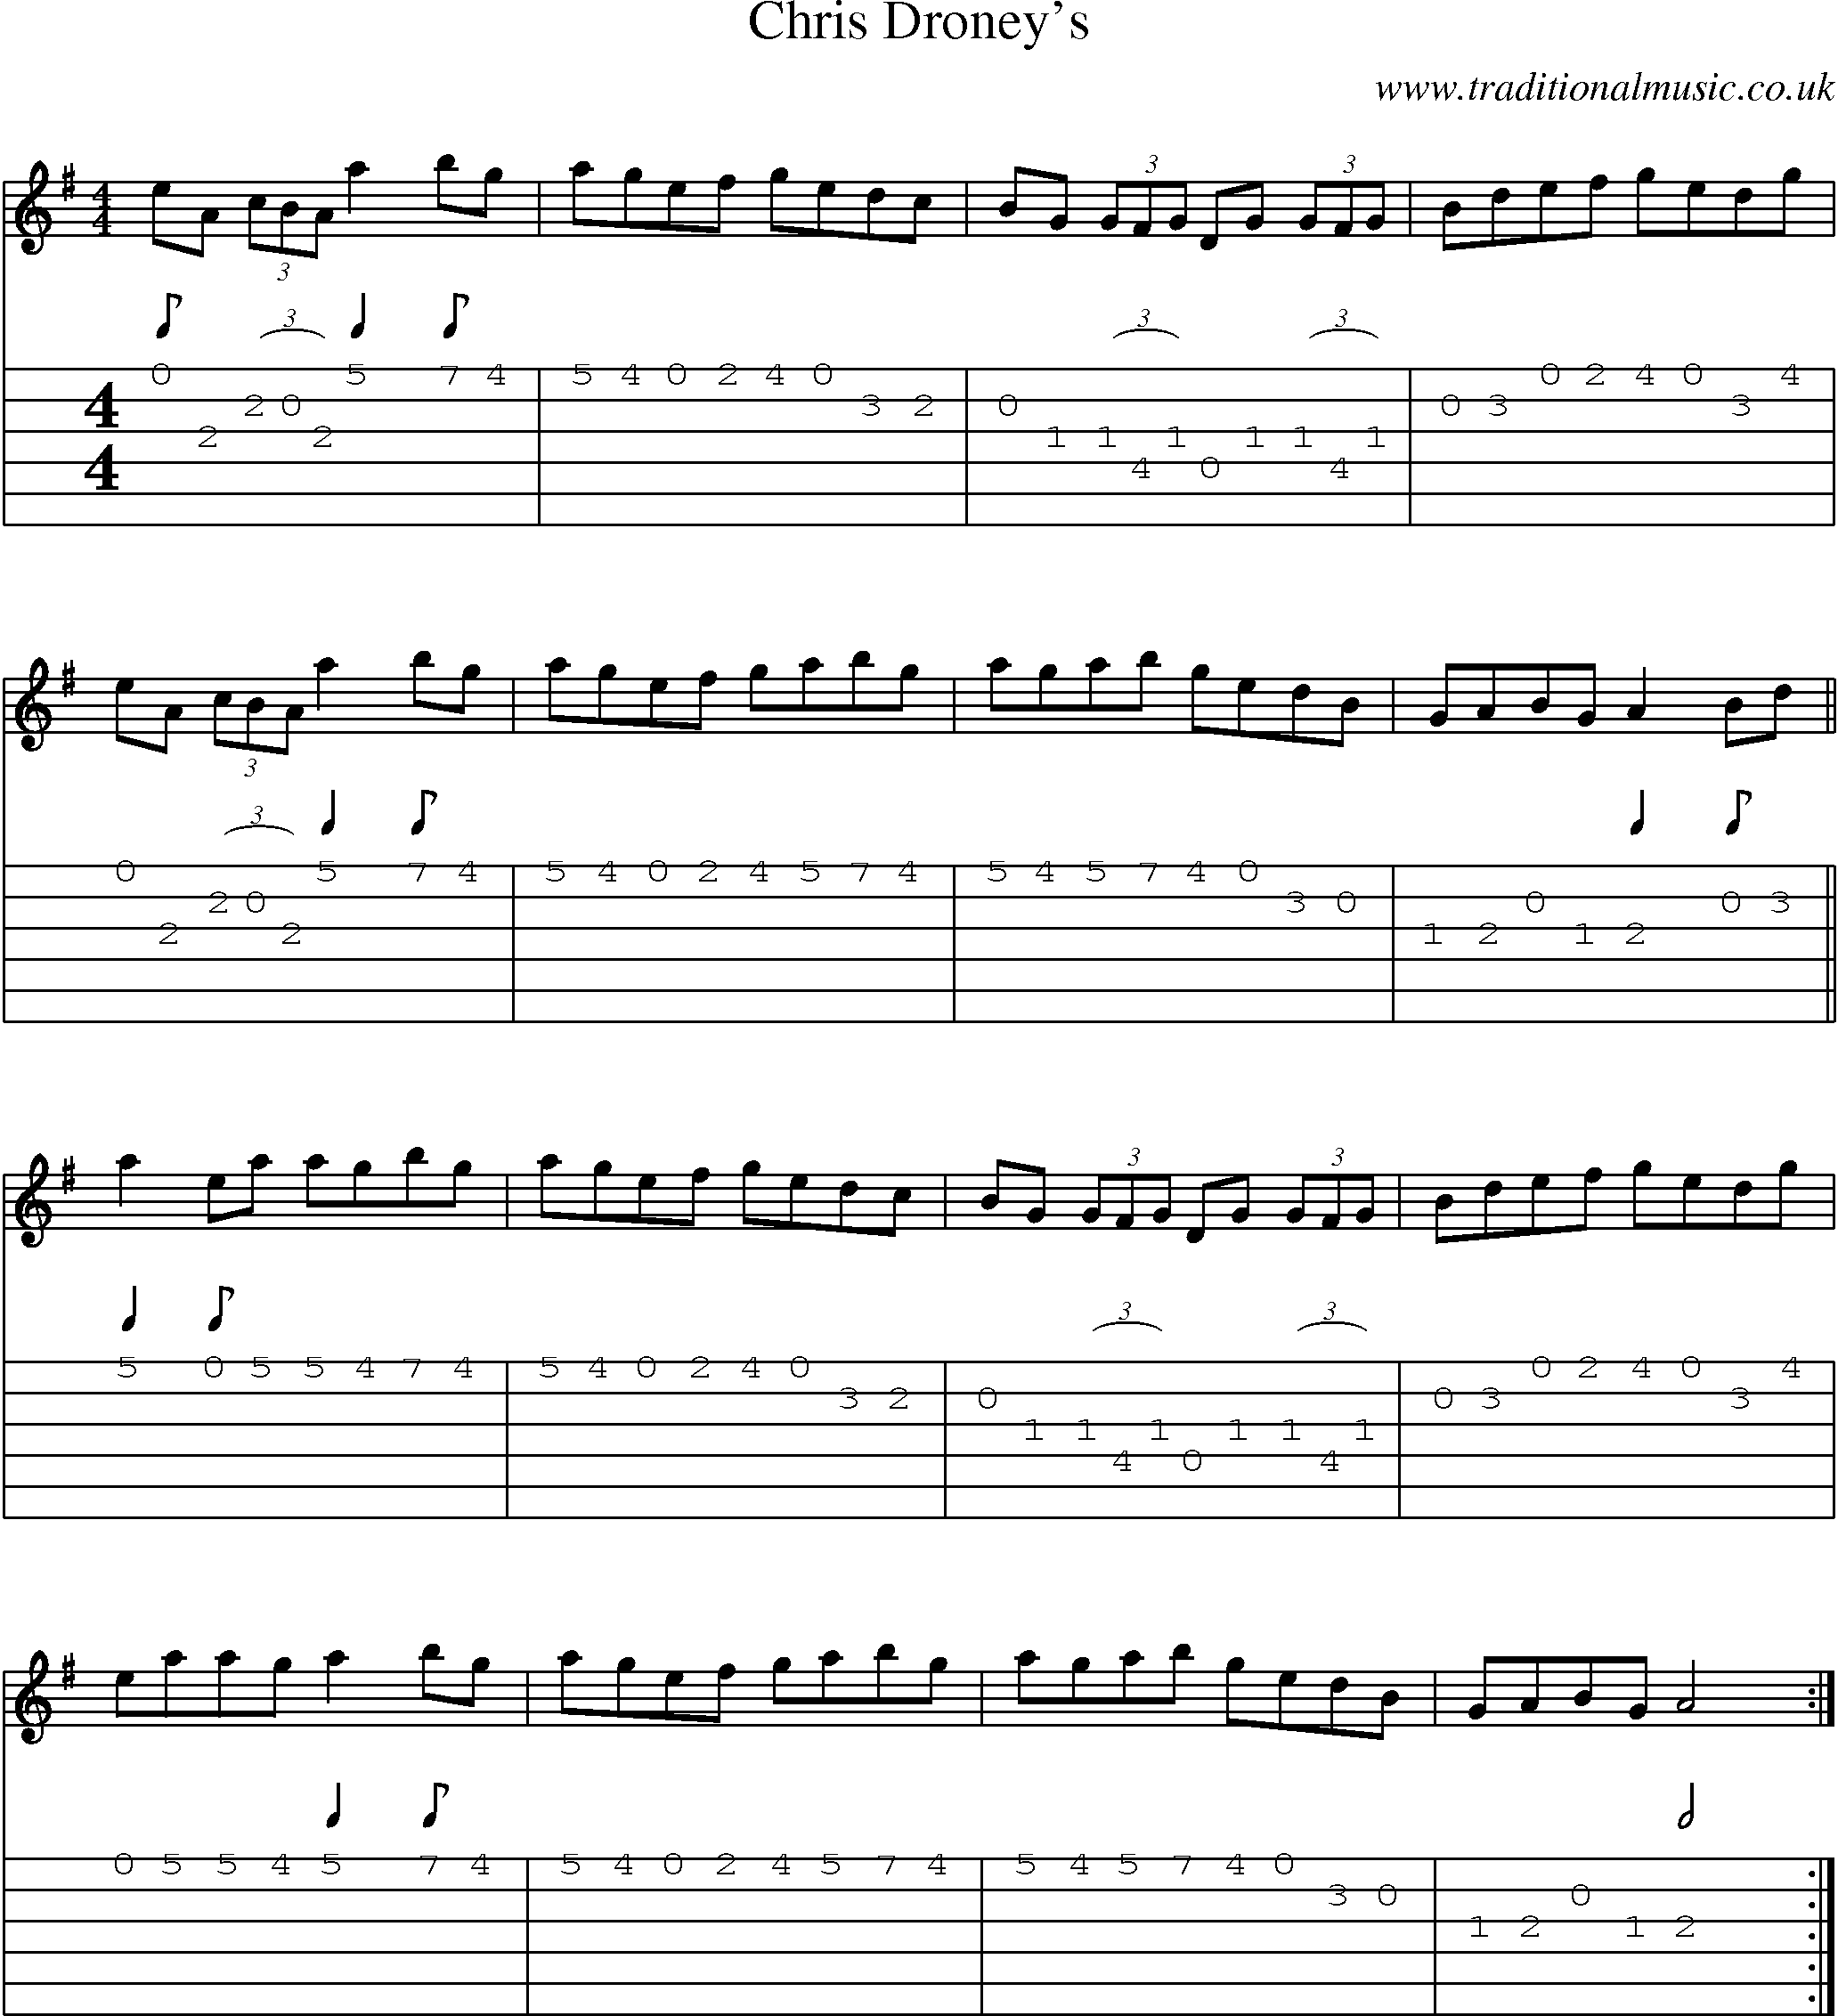 Music Score and Guitar Tabs for Chris Droneys